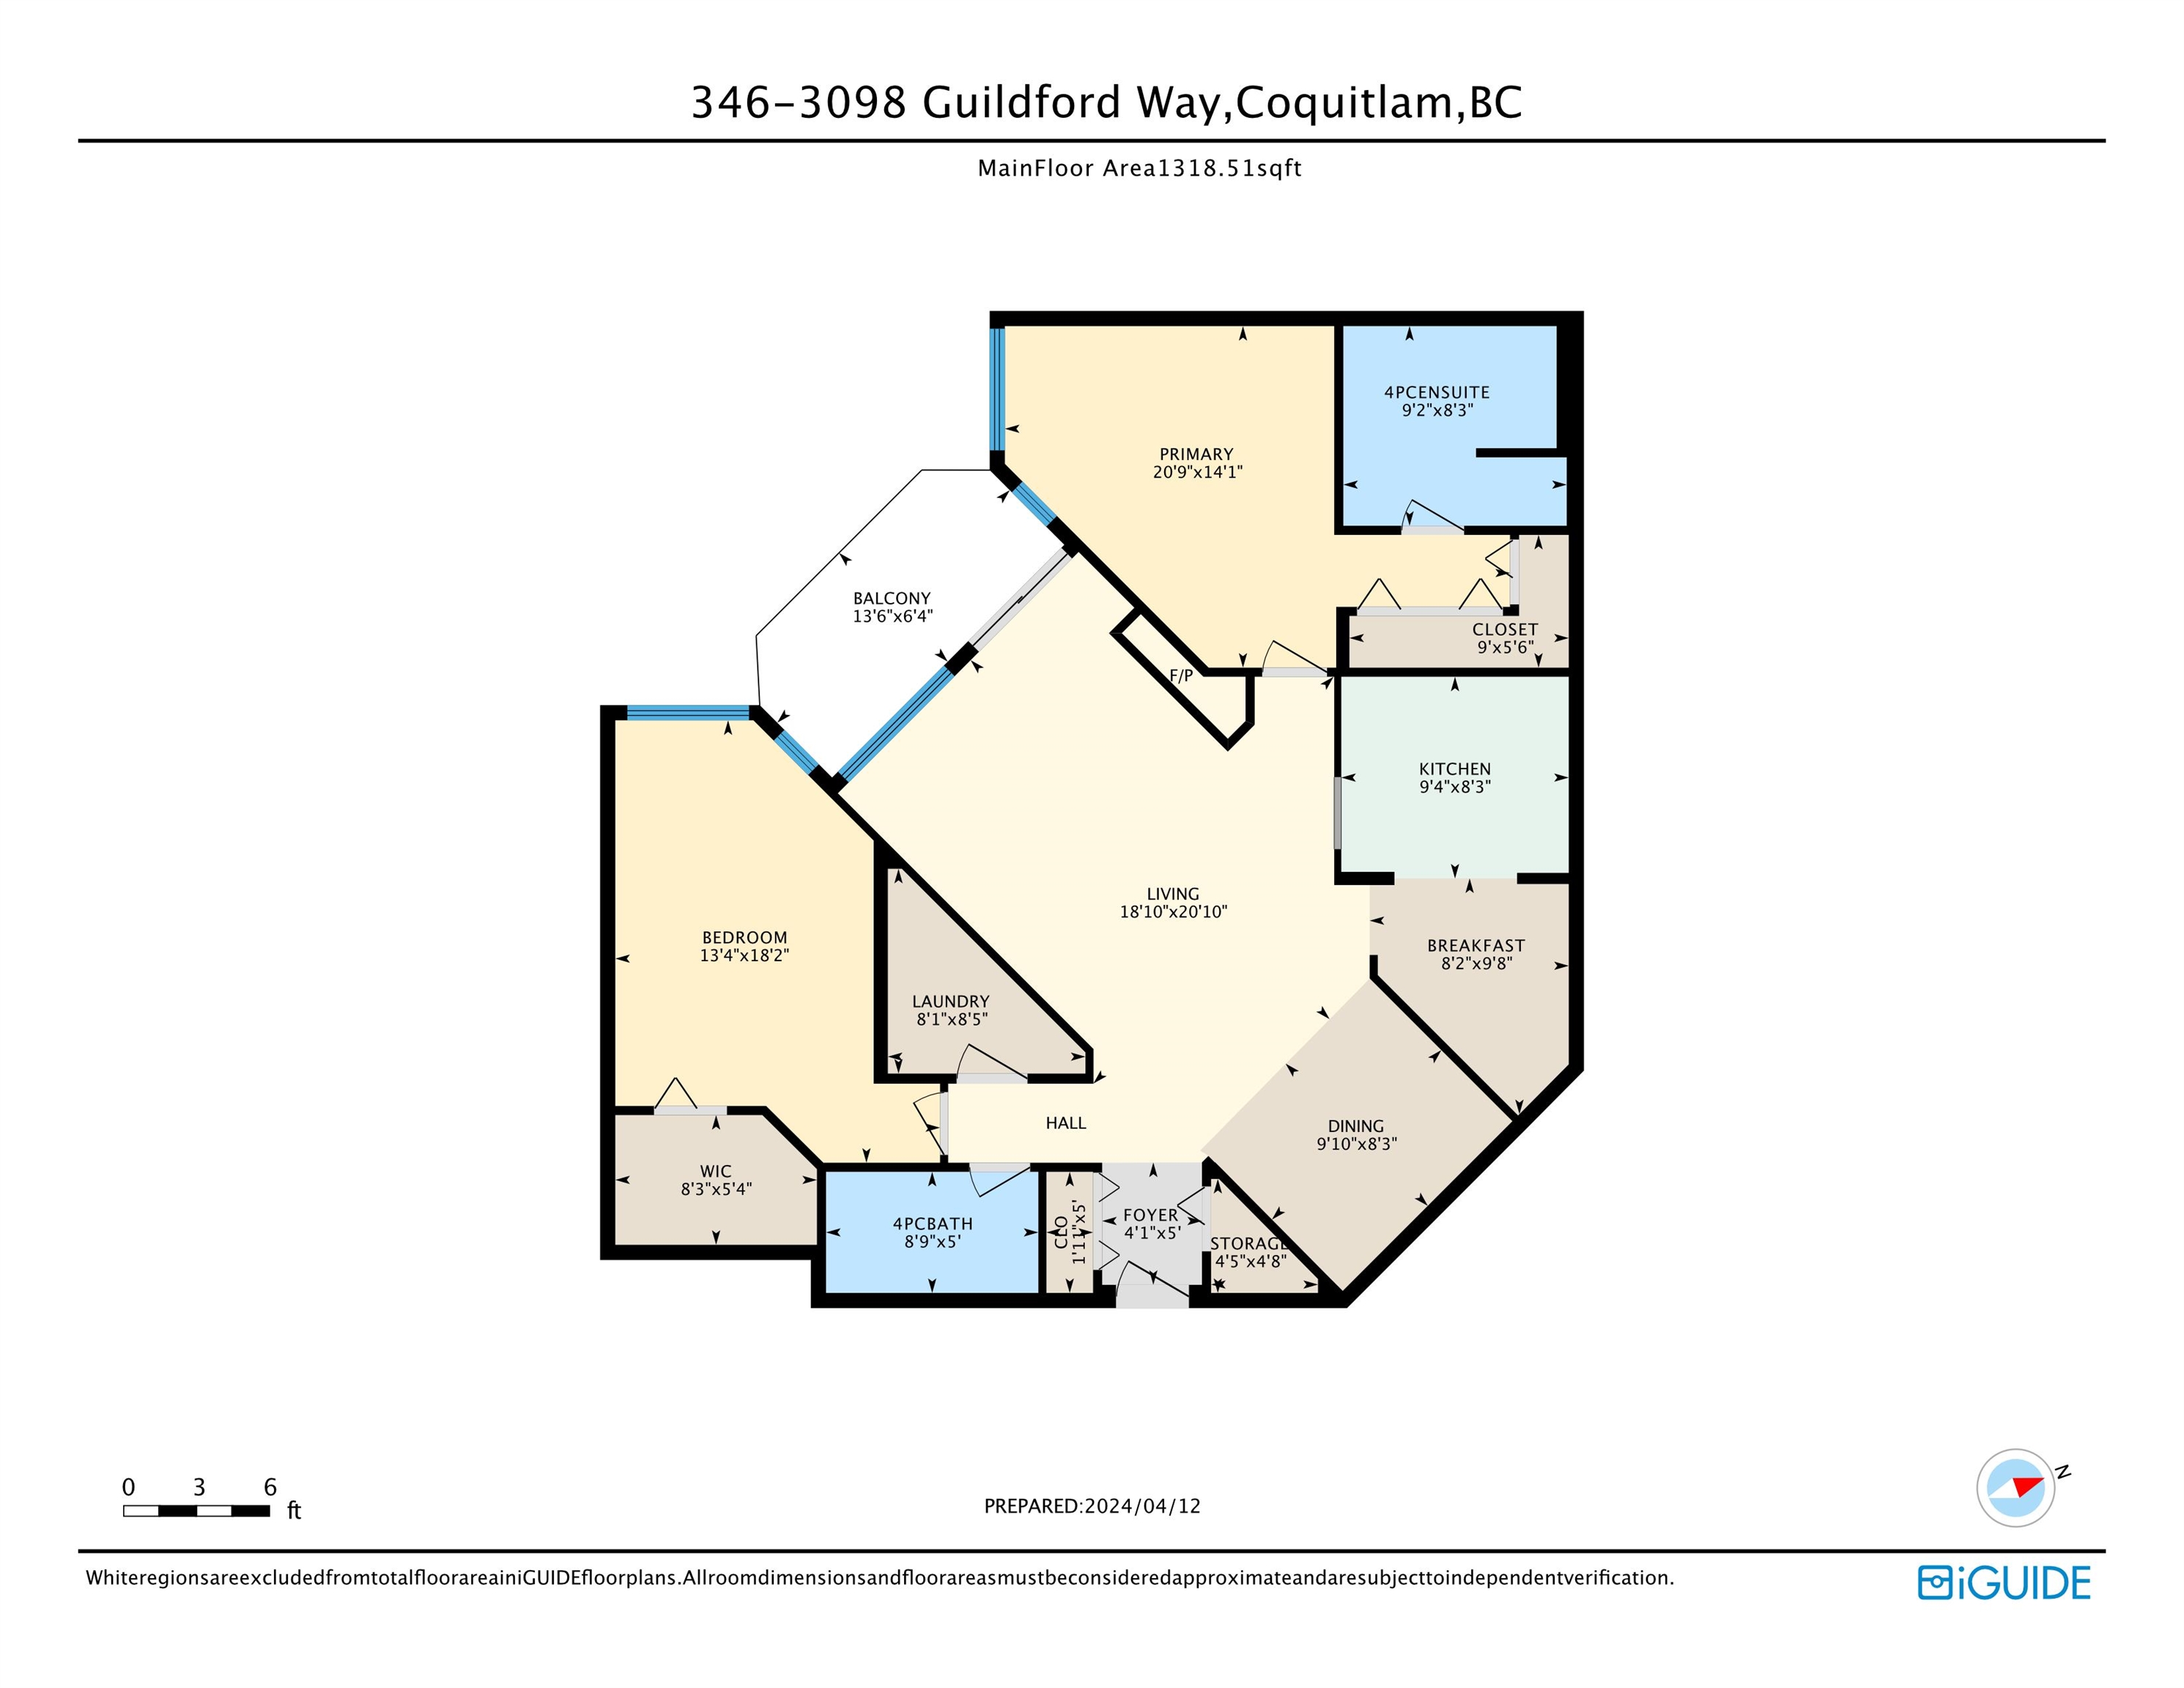 Listing image of 346 3098 GUILDFORD WAY